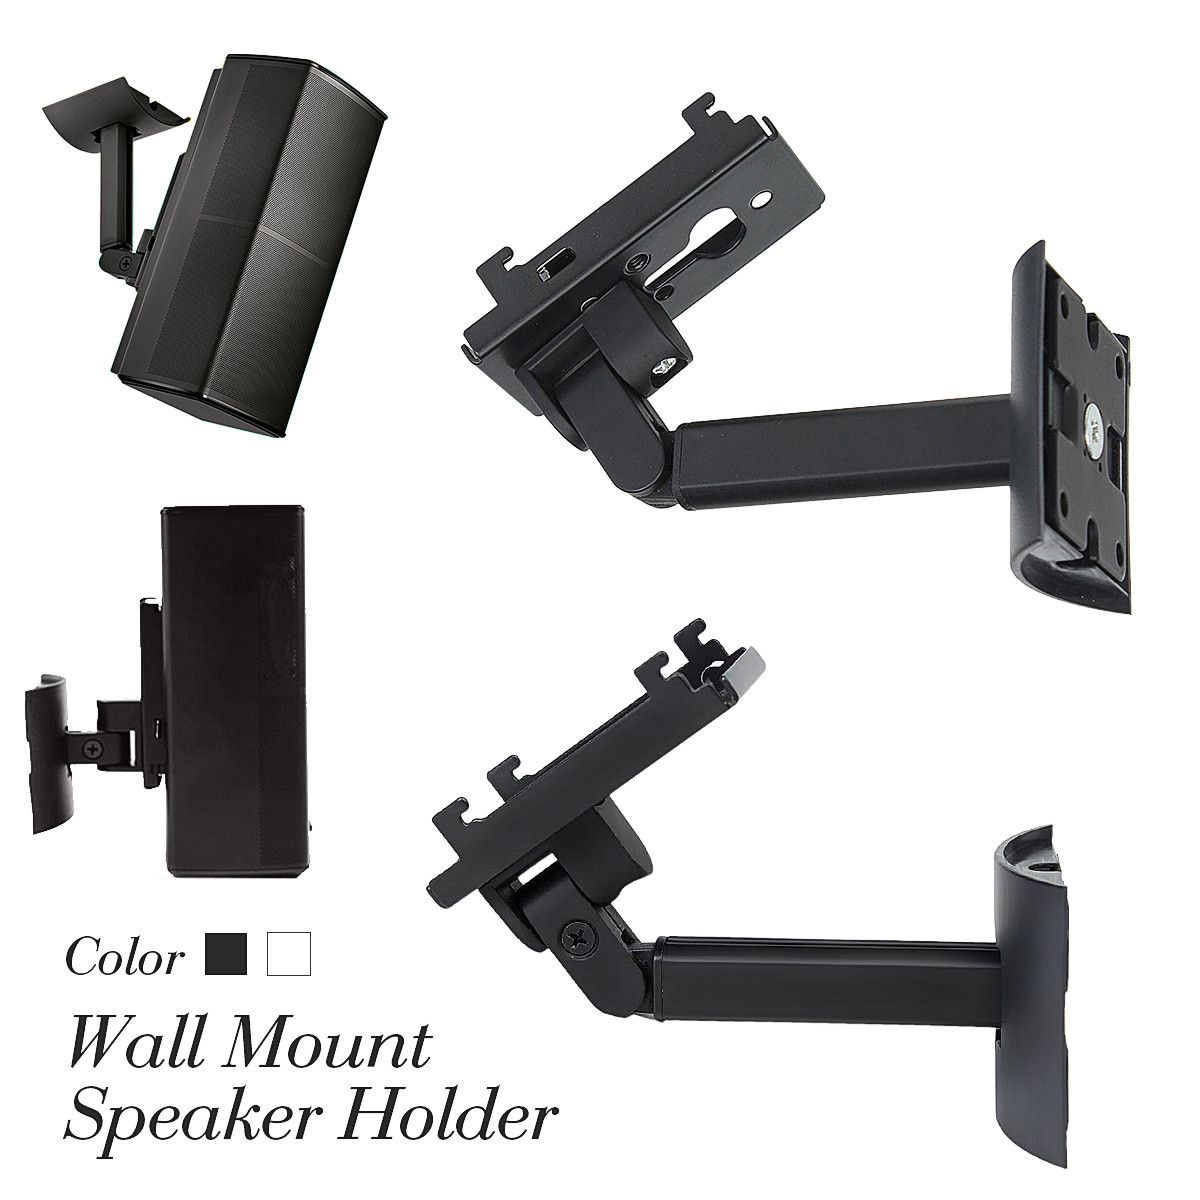 LEORY-Universal-Stainless-Steel-Wall-Mount-Speaker-Bracket-Speaker-Holder-Mount-Stand-with-Mount-Acc-1688860